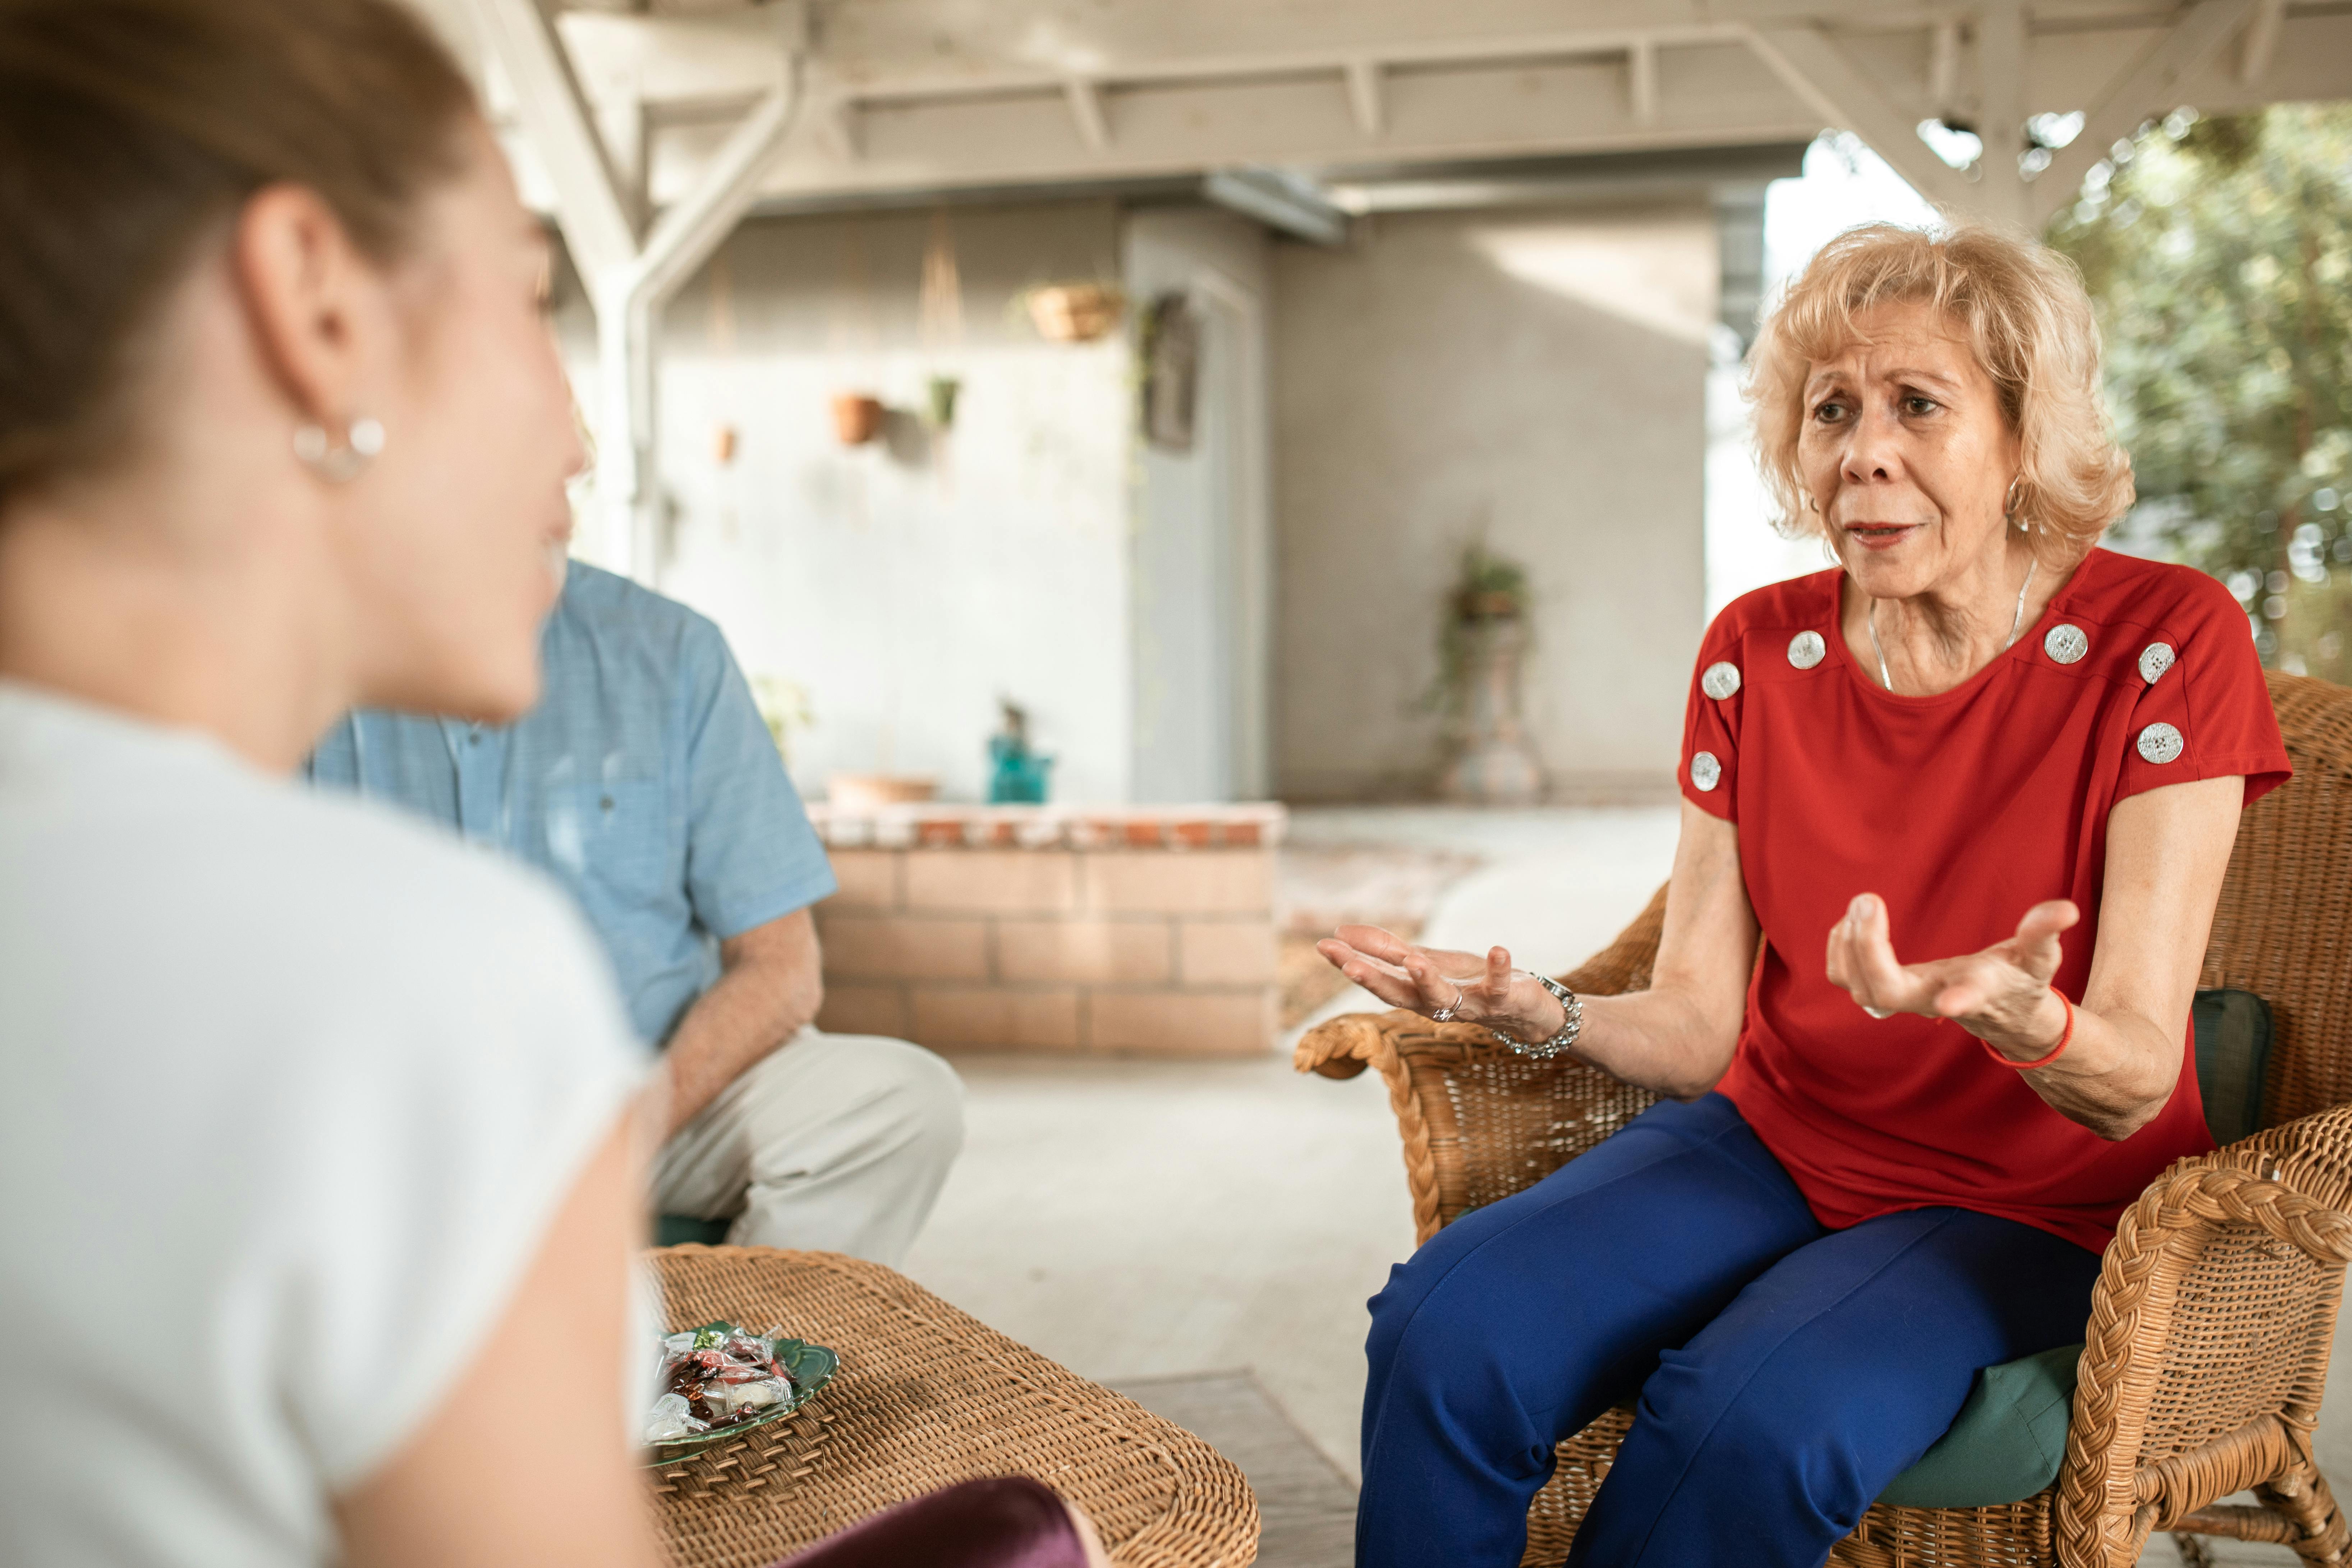 An older woman trying to reason with a younger one | Source: Pexels